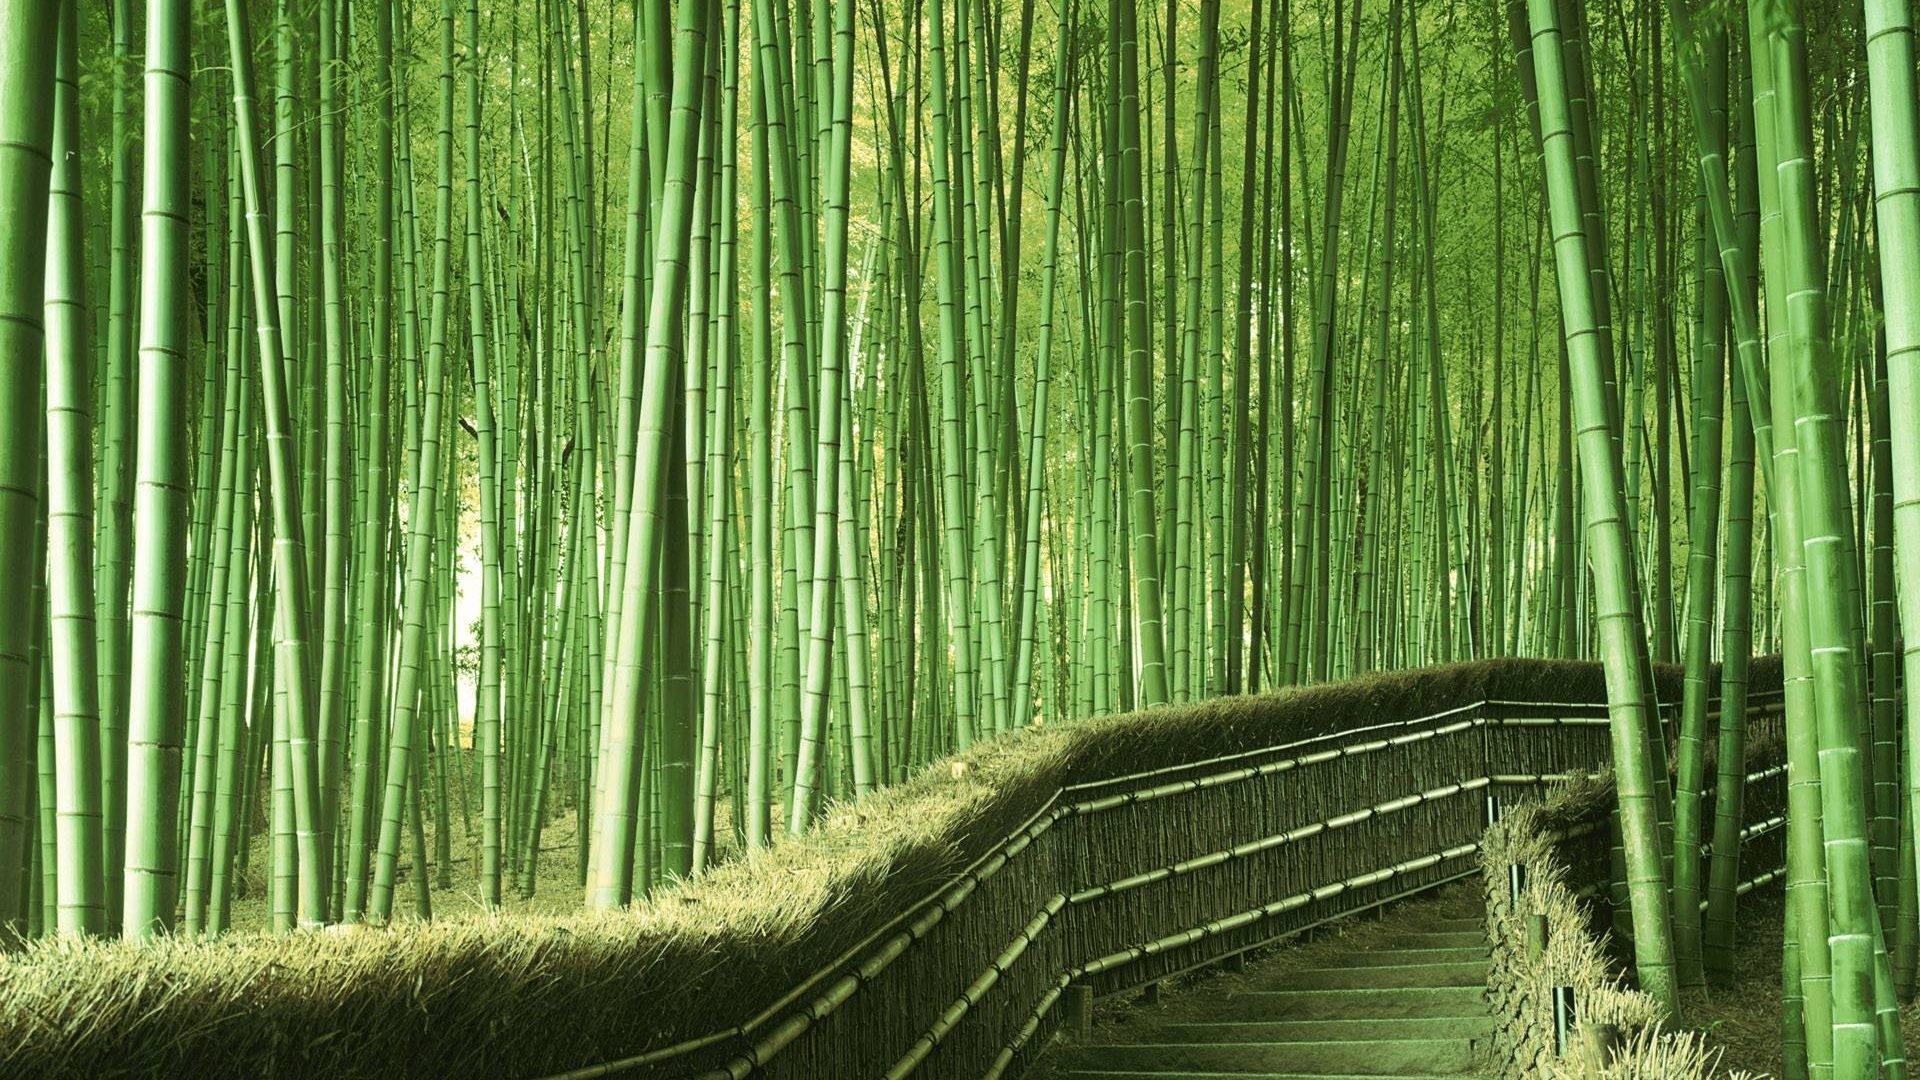 Kyoto Bamboo Forest Wallpaper 1920x1080